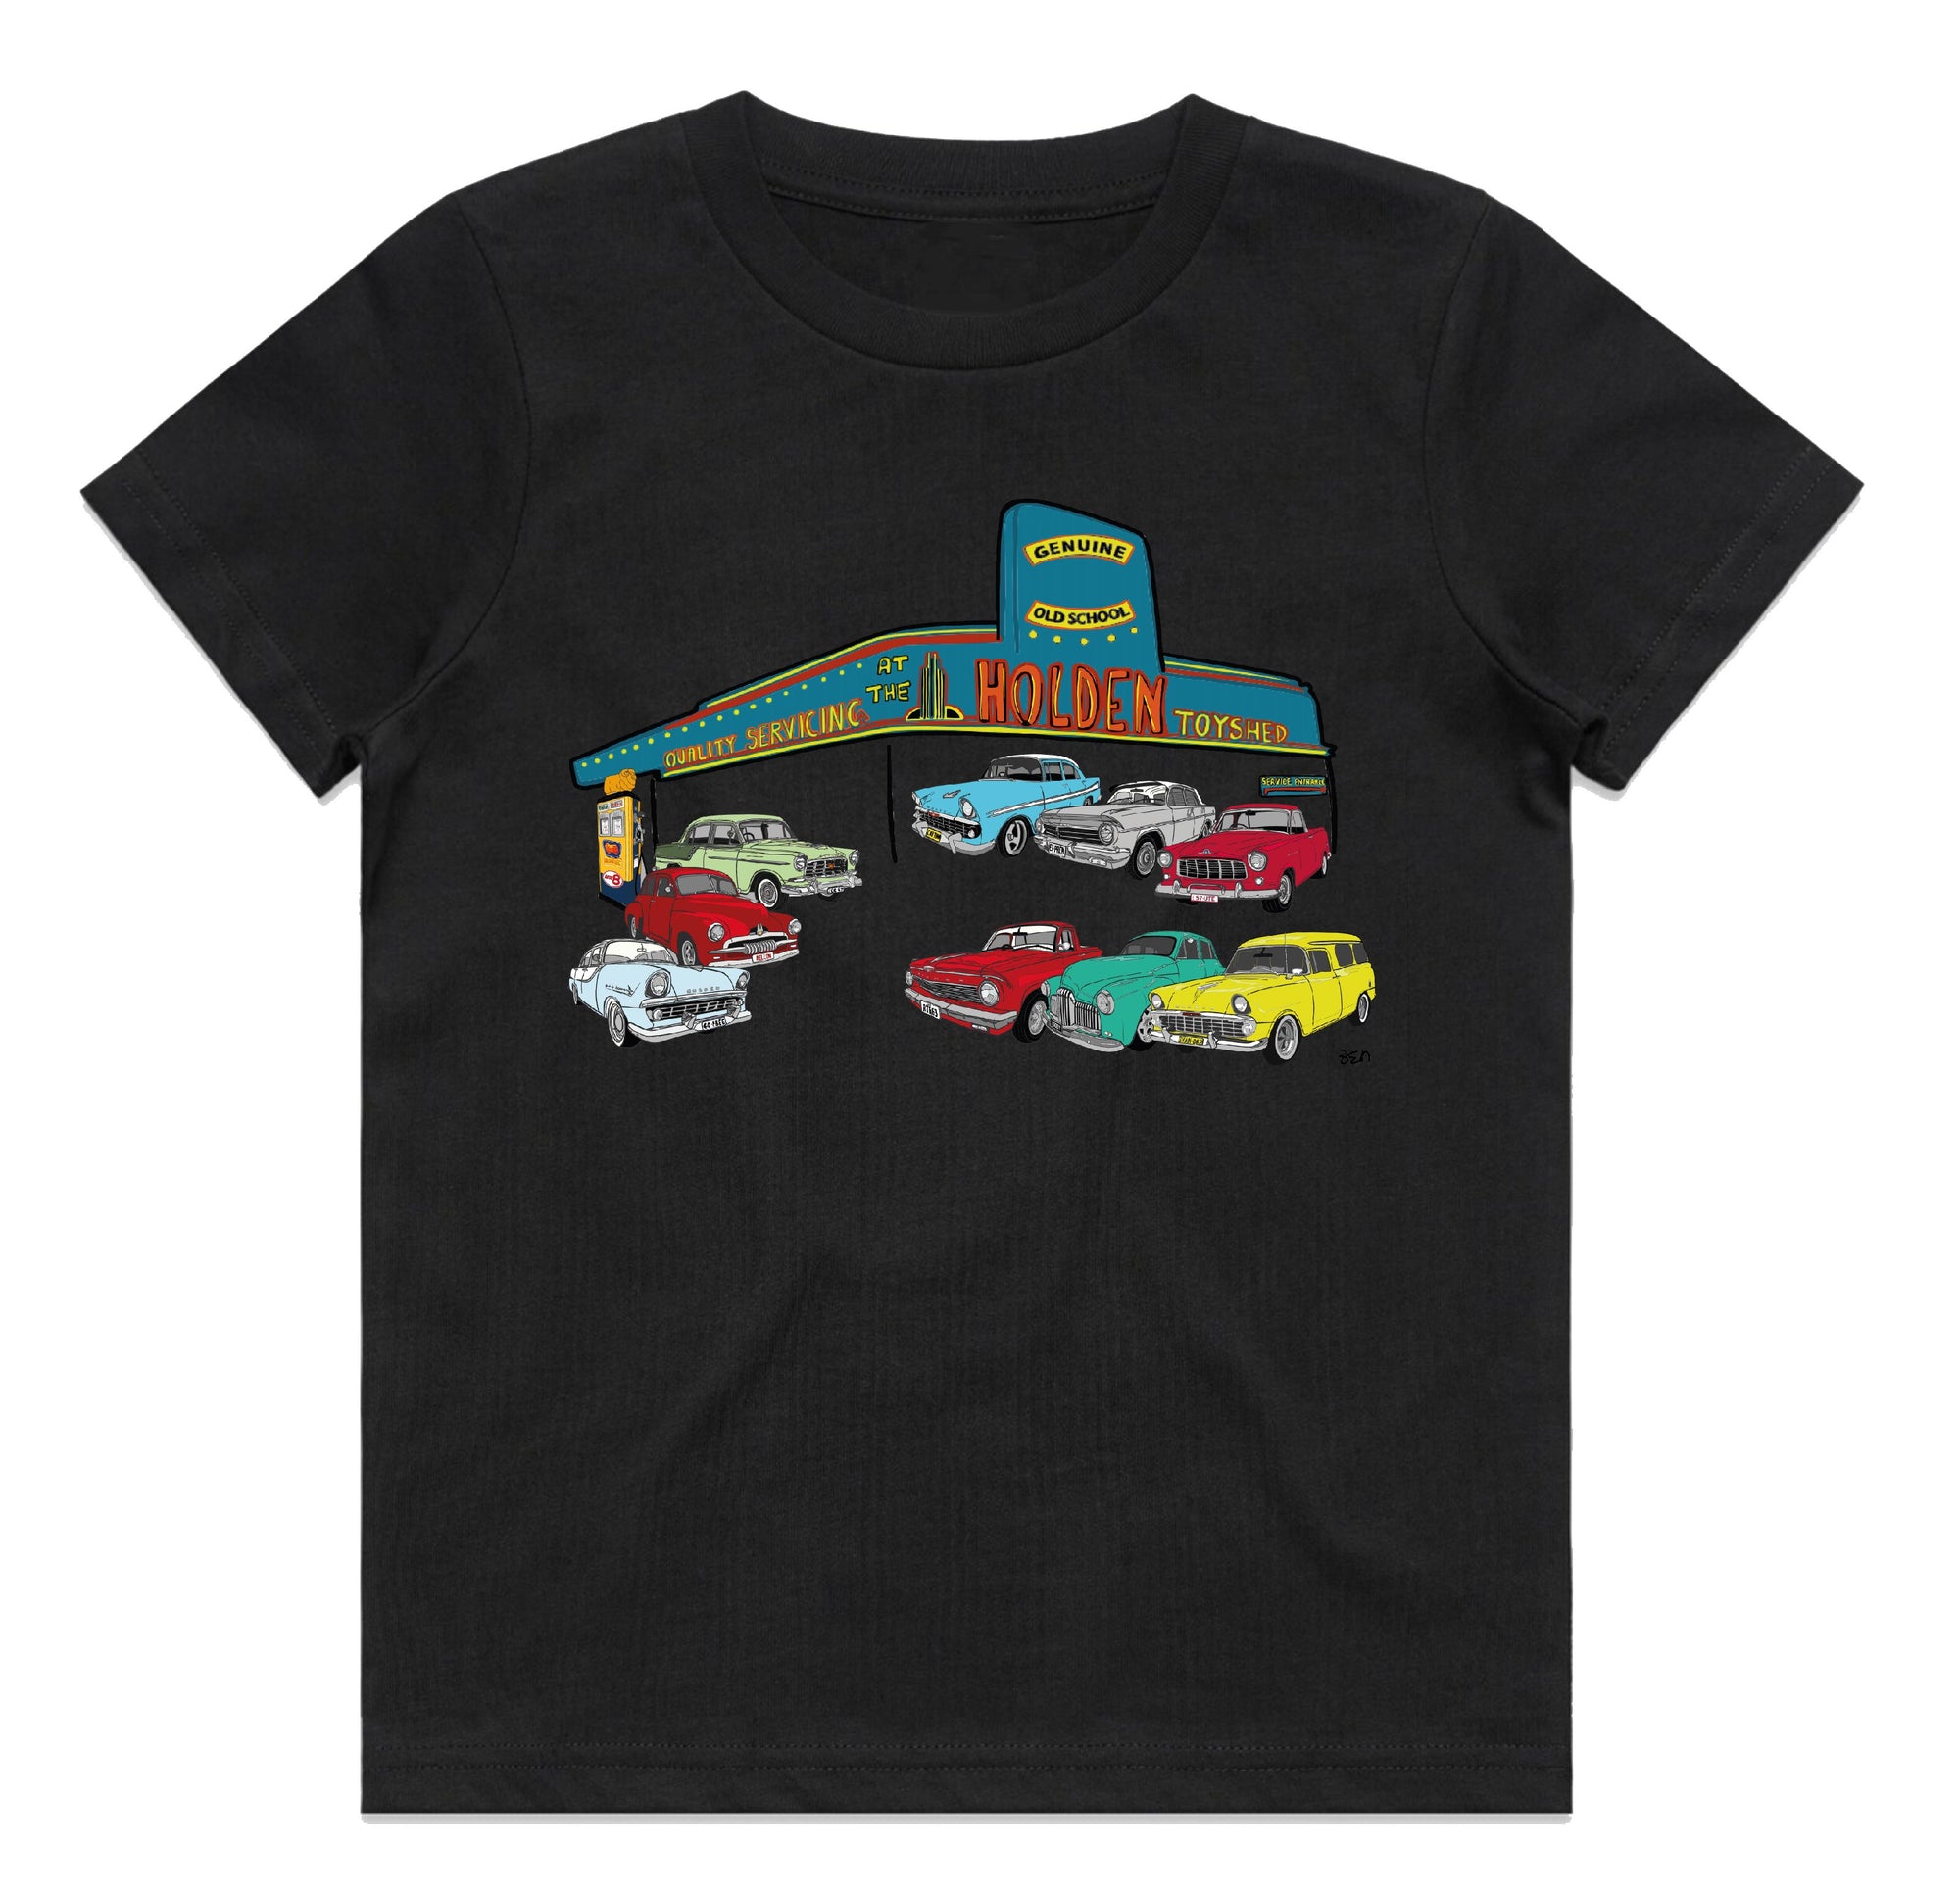 'THE HOLDEN TOYSHED' F SERIES & E SERIES HOLDEN GARAGE KIDS TEE